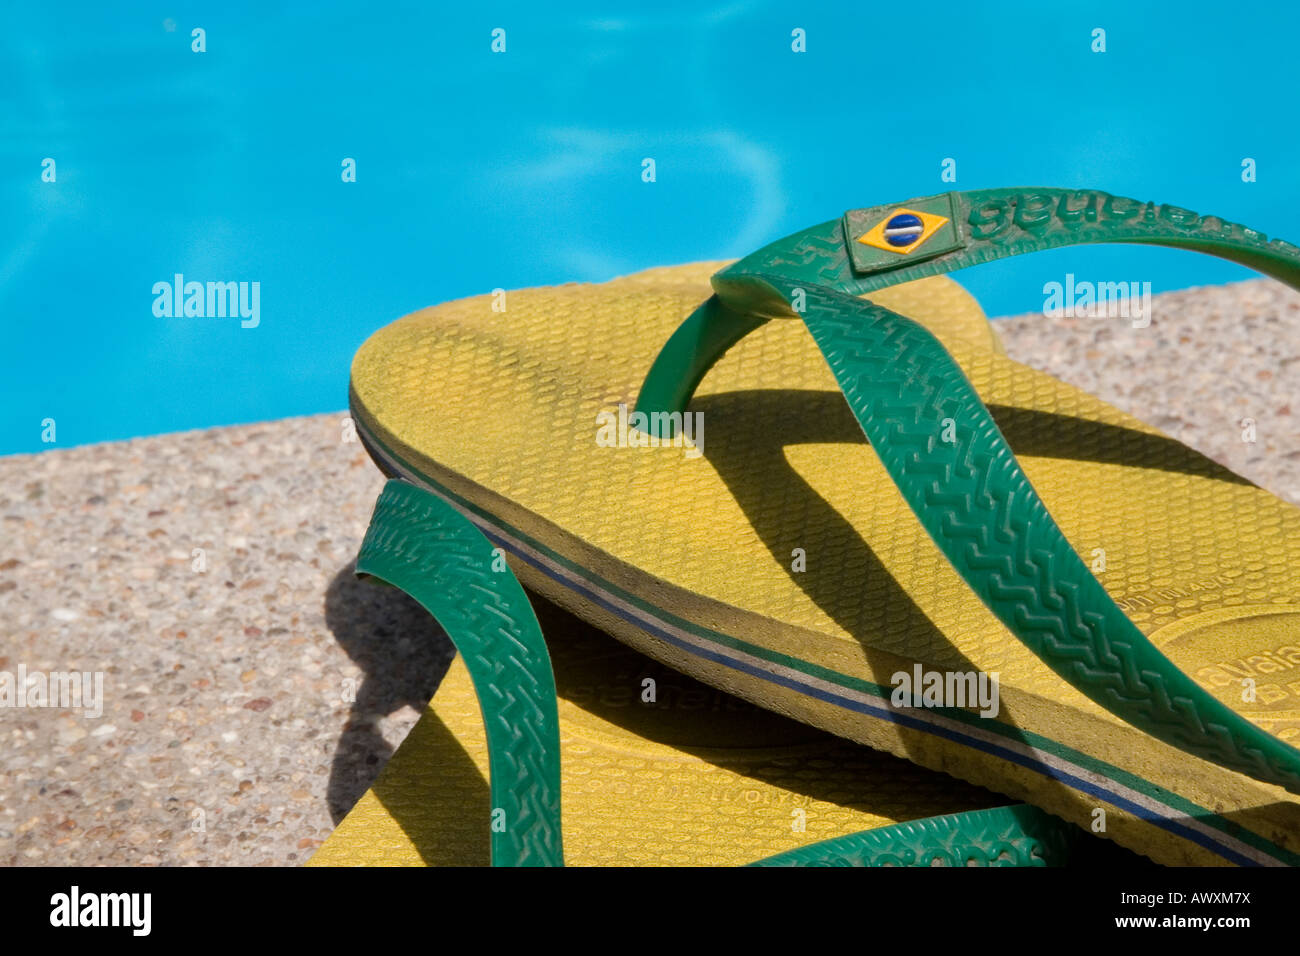 Yellow and Green Havaiana Flip Flops by Swimming Pool Stock Photo